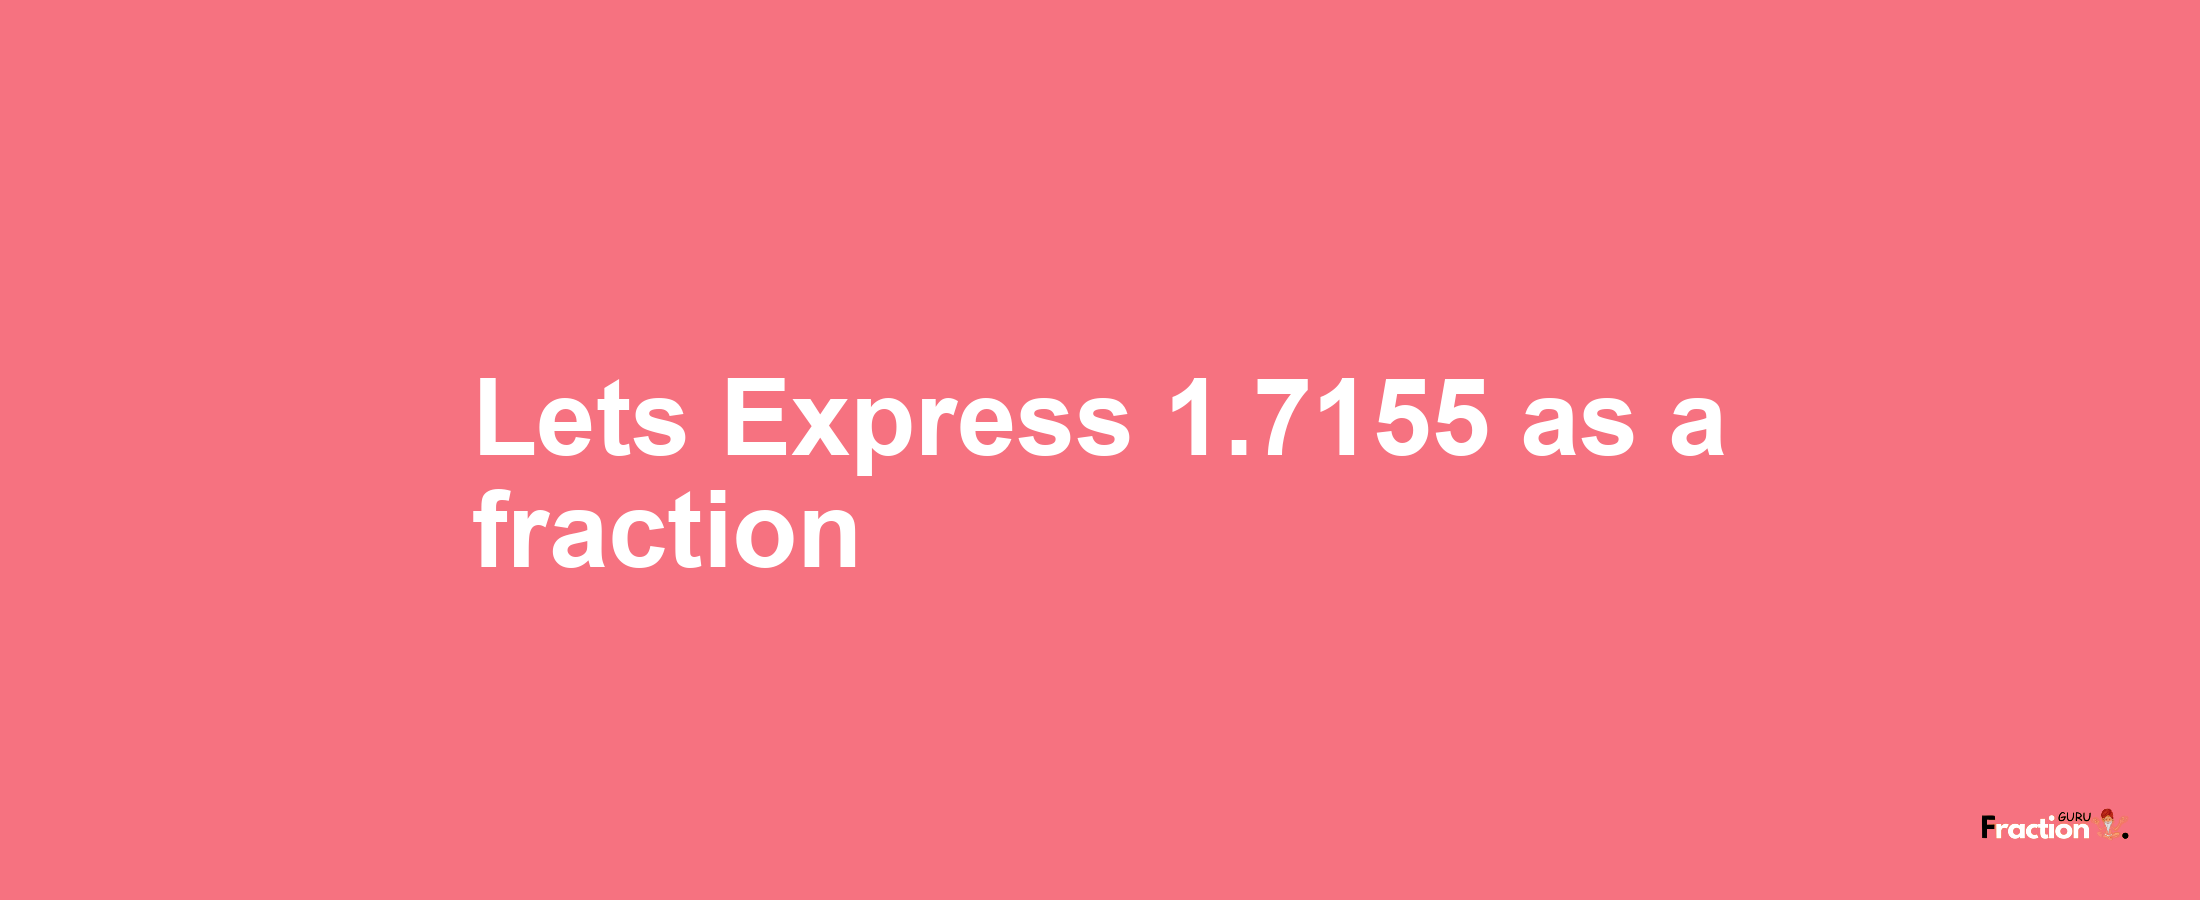 Lets Express 1.7155 as afraction